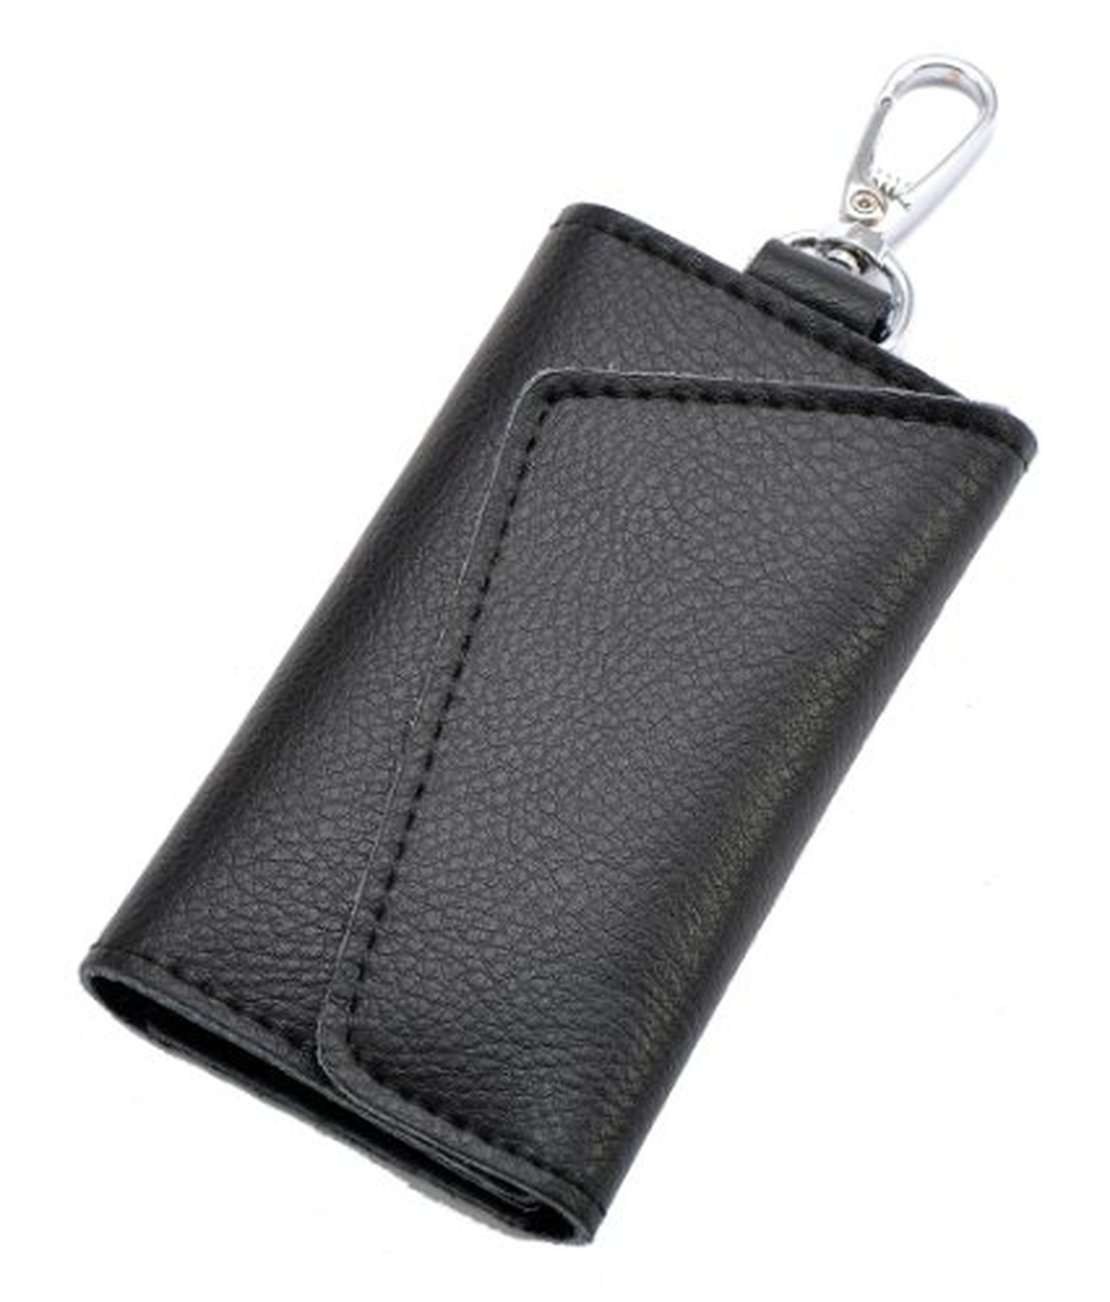 Shop for and Buy 4 Hook Leather Key Case Heavy Duty at